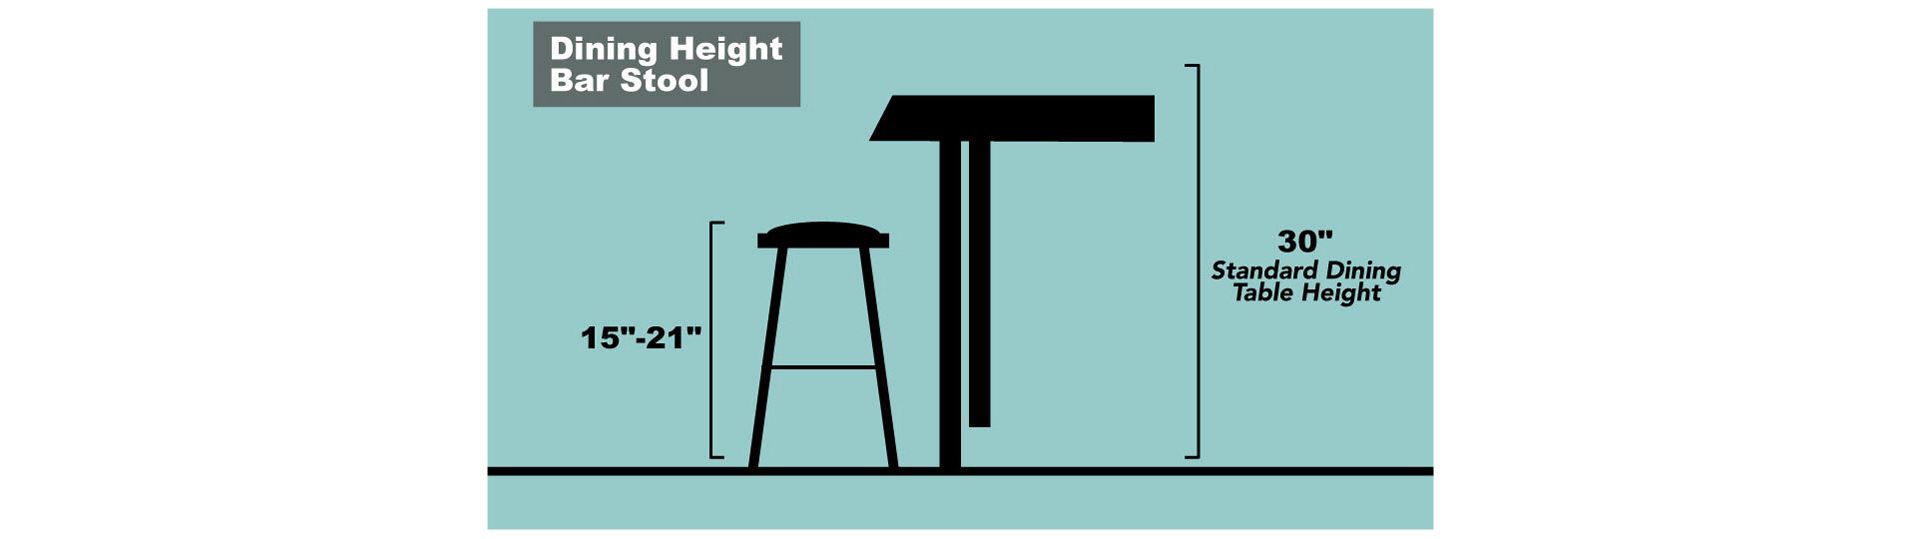 Dining Height Bar Stool. 15-21inches. Fits under a standard dining table measuring 30 inches.